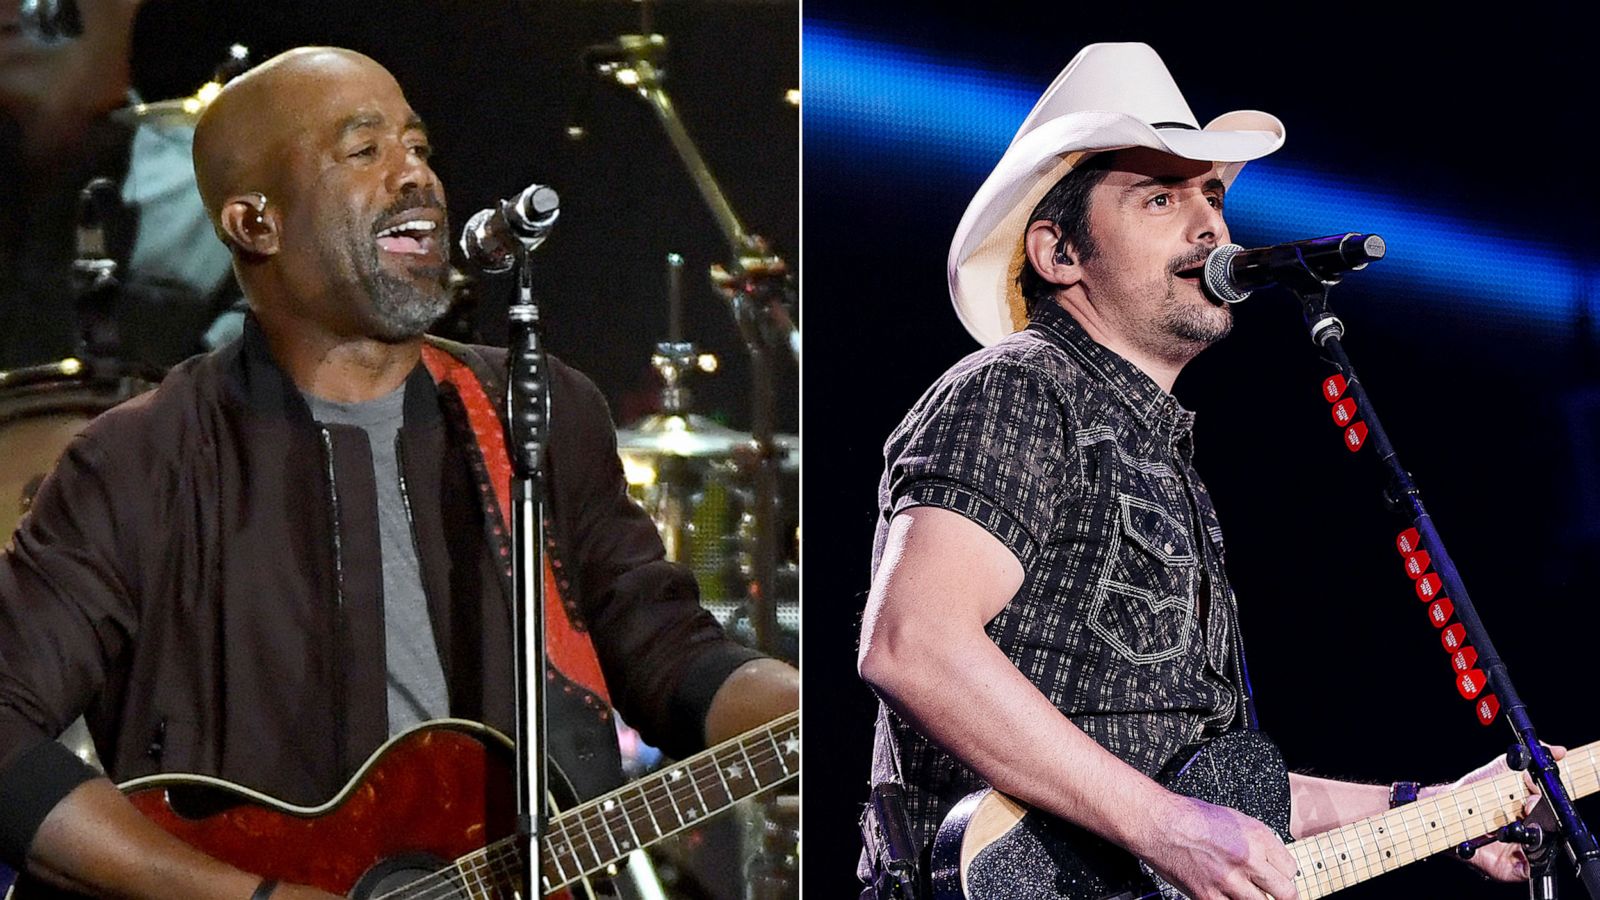 PHOTO: In this Sept. 20, 2019, file photo, Darius Rucker performs onstage during the 2019 iHeartRadio Music Festival in Las Vegas. | In this March 7, 2020, file photo, Brad Paisley performs on stage at Abbotsford Centre in Abbotsford, Canada.